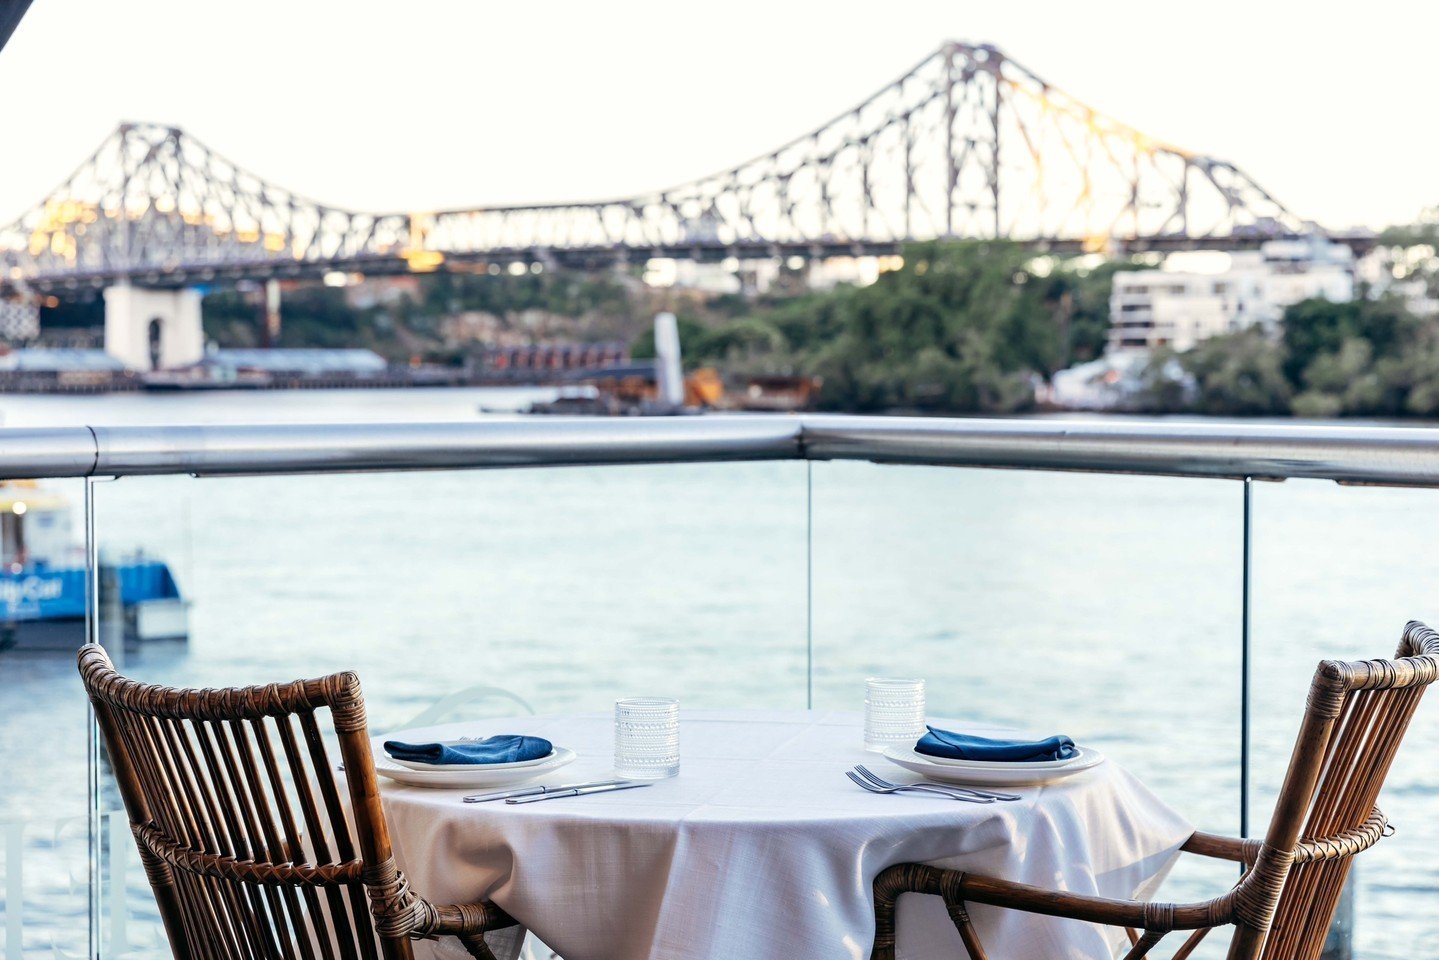 Seafood and stunning views - the perfect pairing

#yourfirstresort

Call (07) 3071 9142 or book online at www.tillerman.com.au/ book-now.
Located 71 Eagle St, Brisbane - On The River.